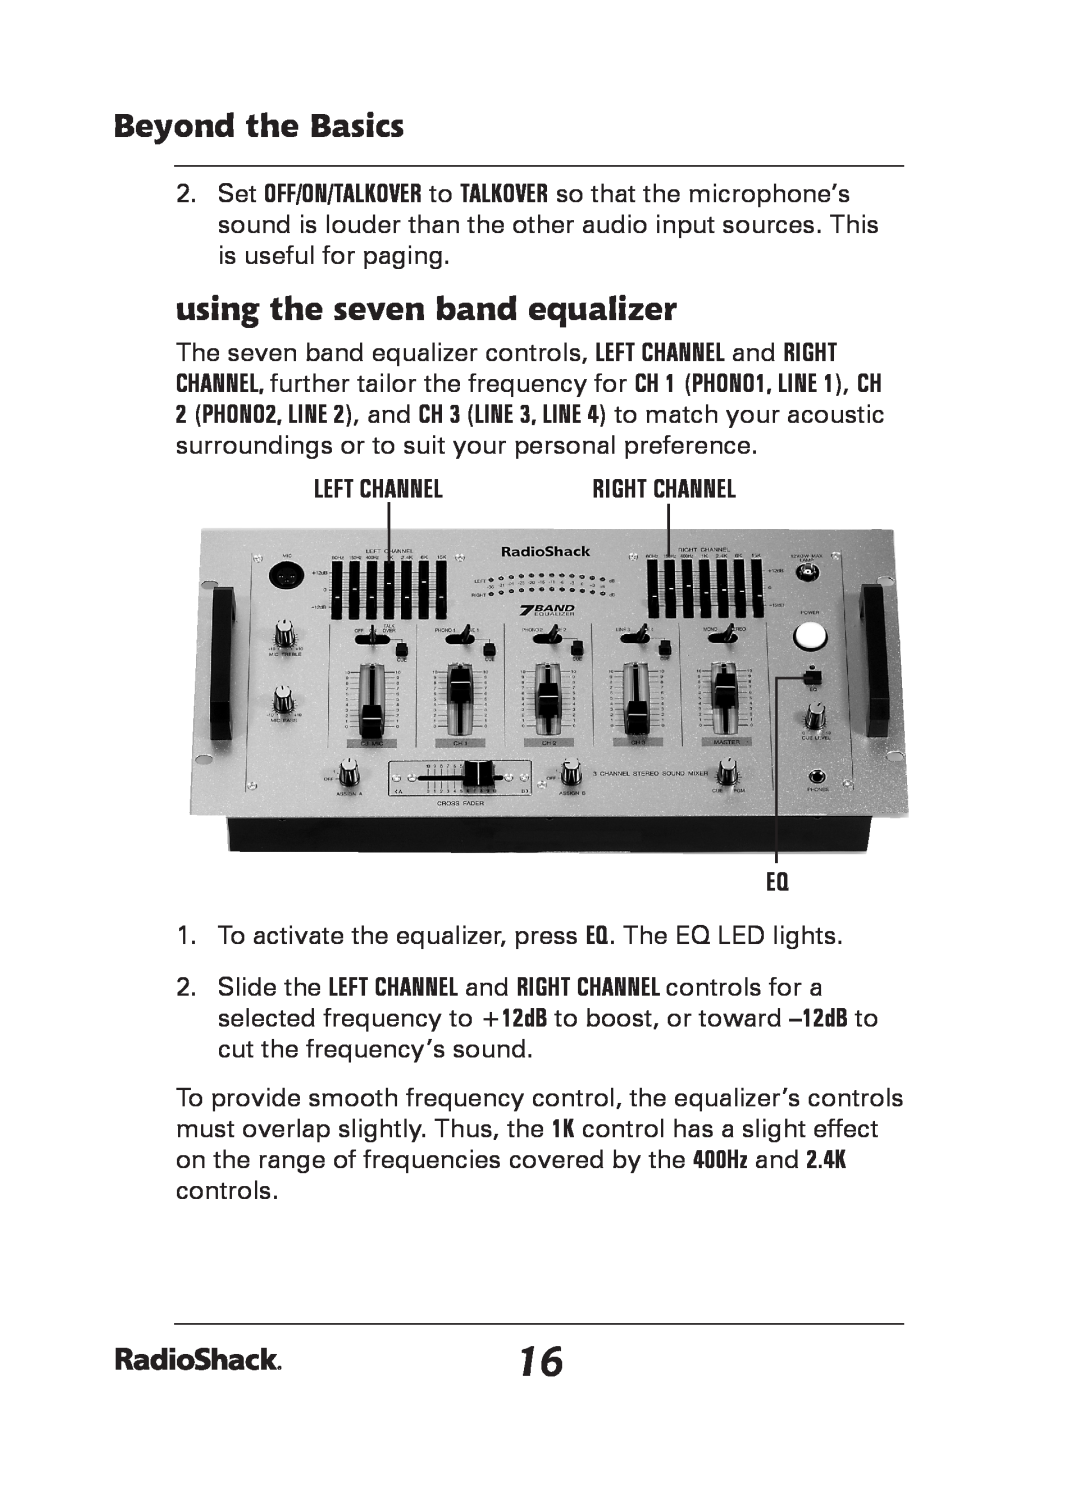 Radio Shack 32-2057 quick start using the seven band equalizer, Left Channel, Beyond the Basics 